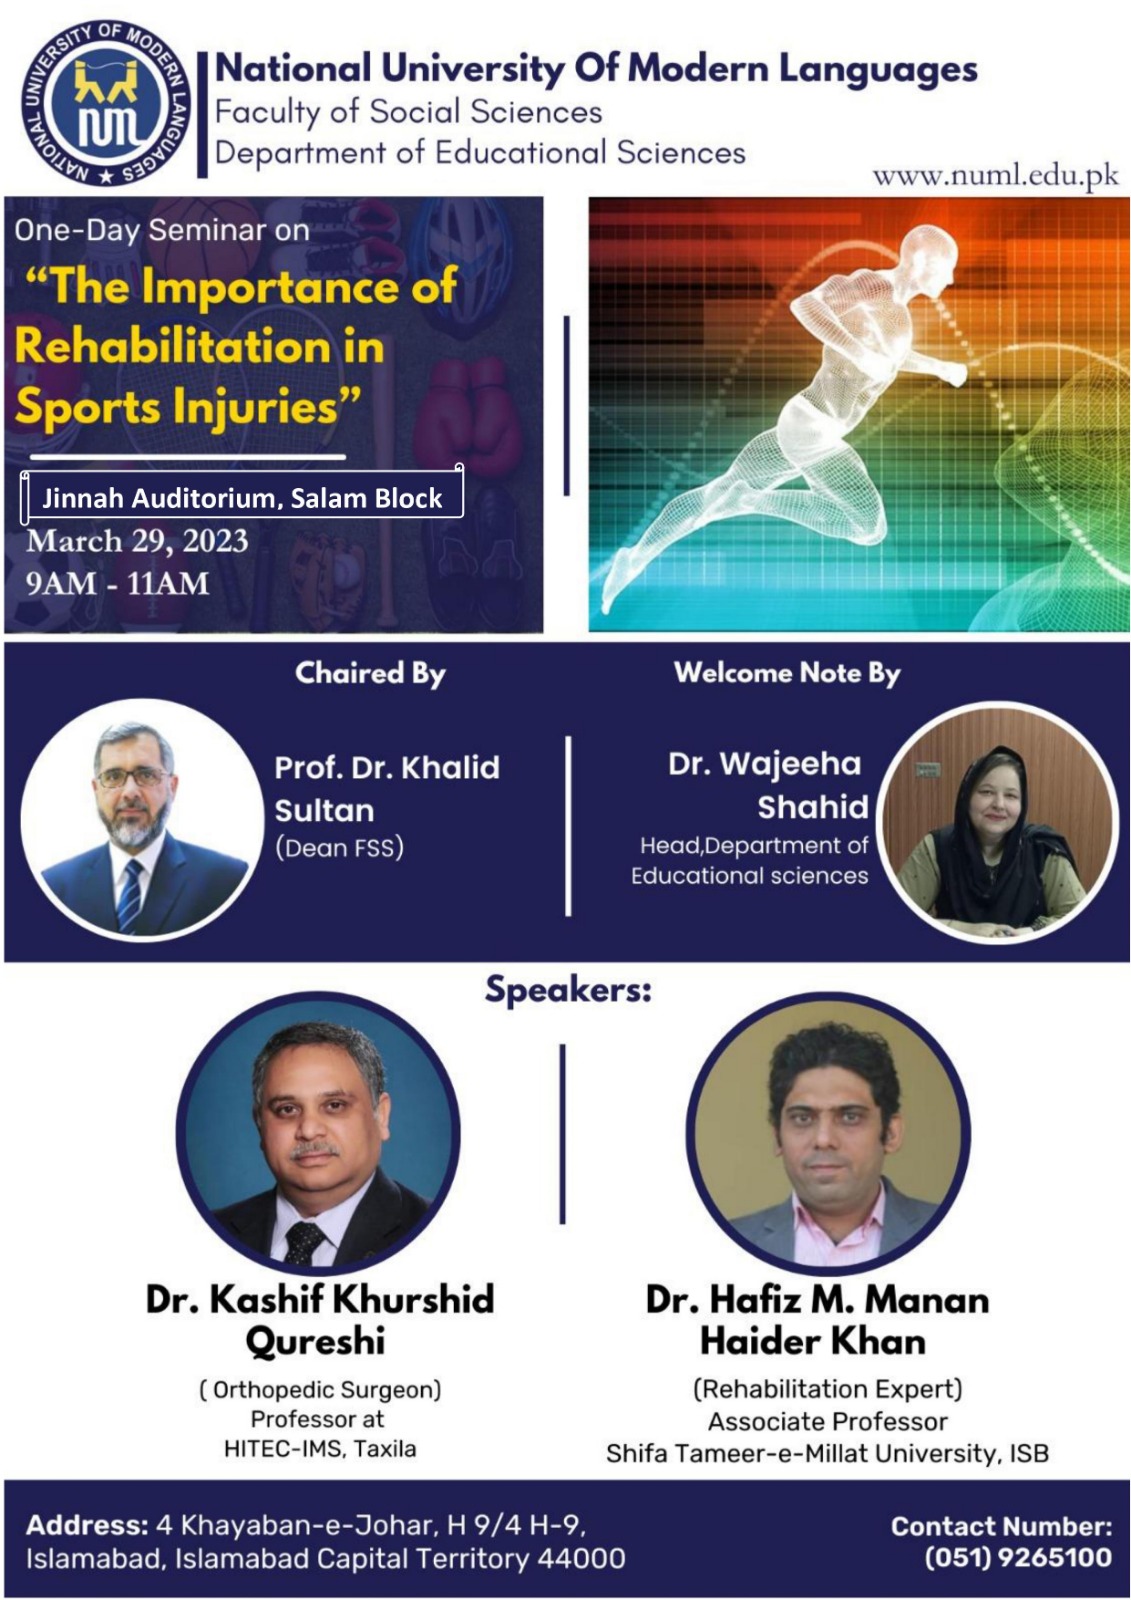 One-Day Seminar: The Importance of Rehabilitation in Sports Injuries